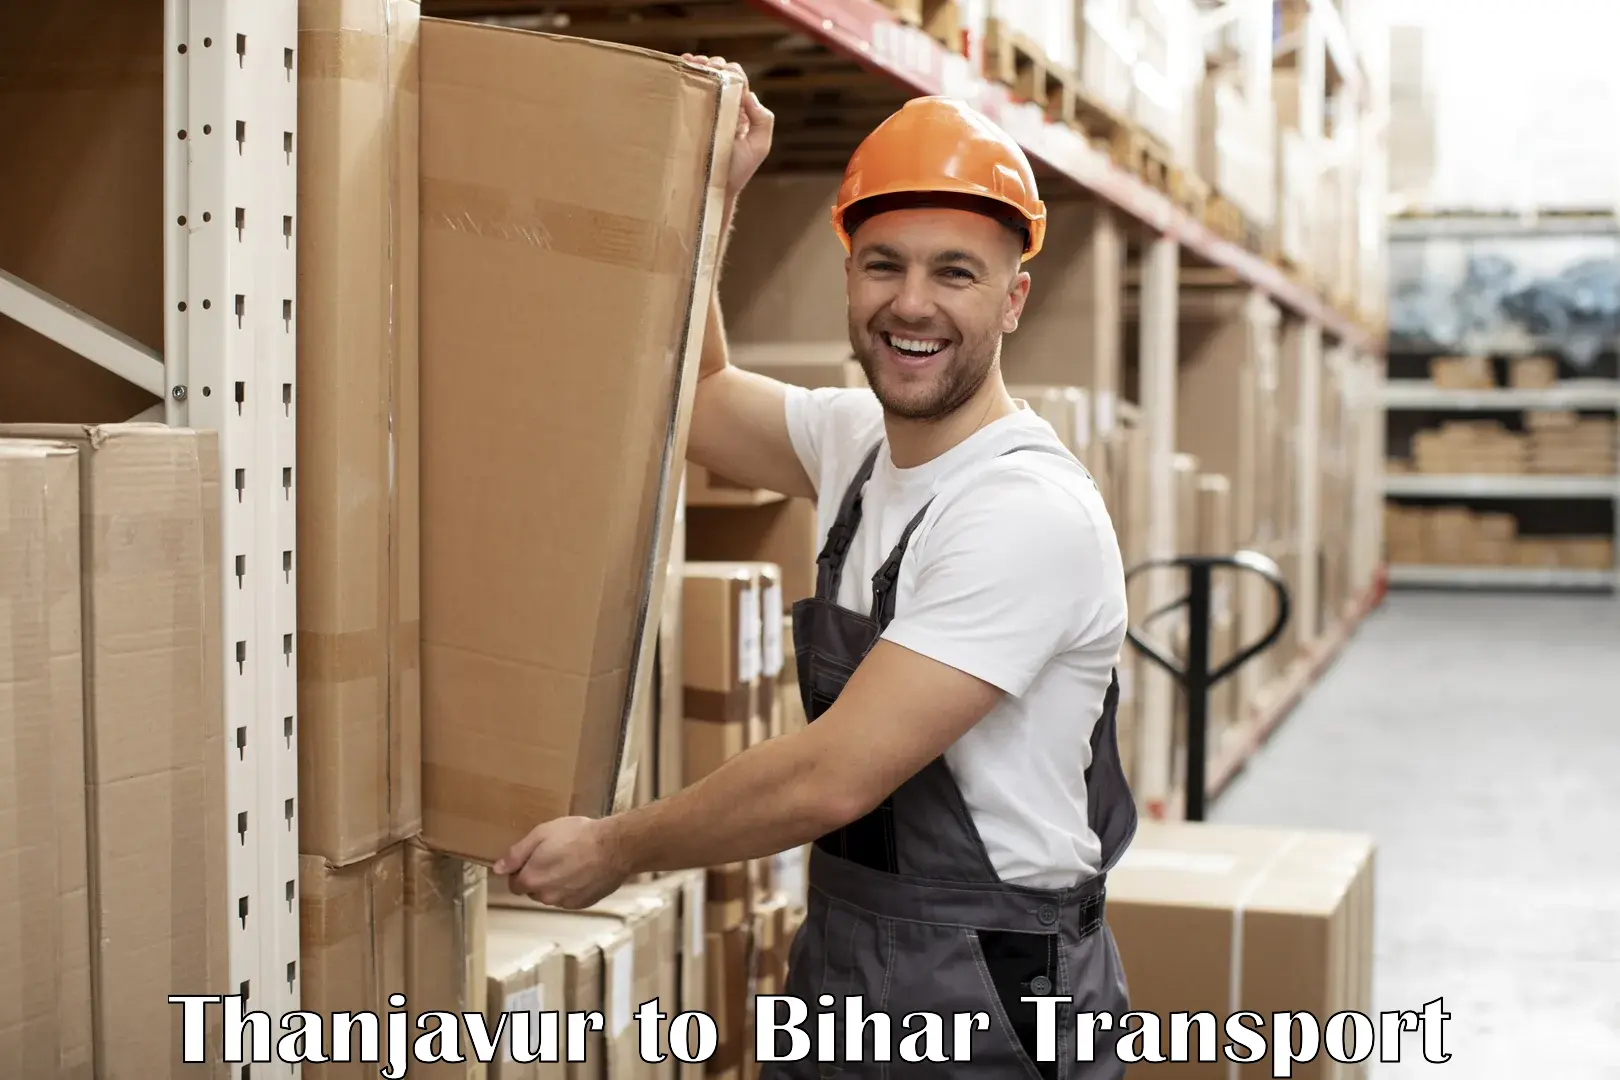 Part load transport service in India Thanjavur to Bihta